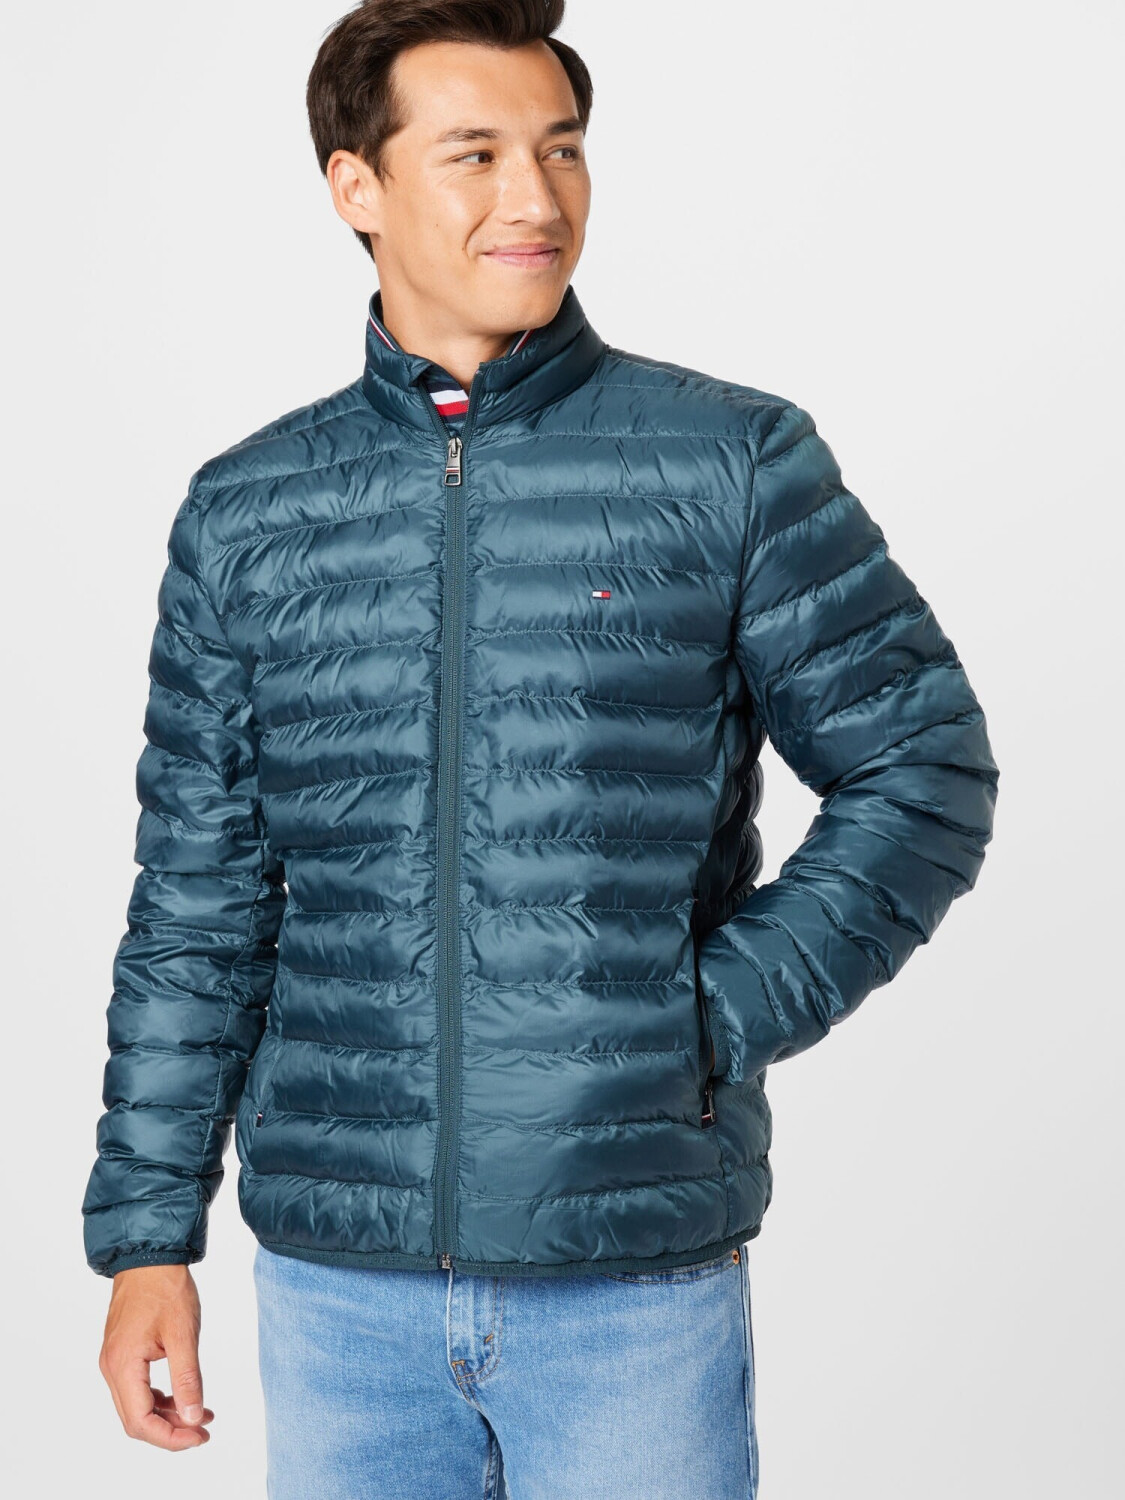 Buy Tommy Hilfiger Quilted Jacket (MW0MW18763) night blue from £165.00 ...